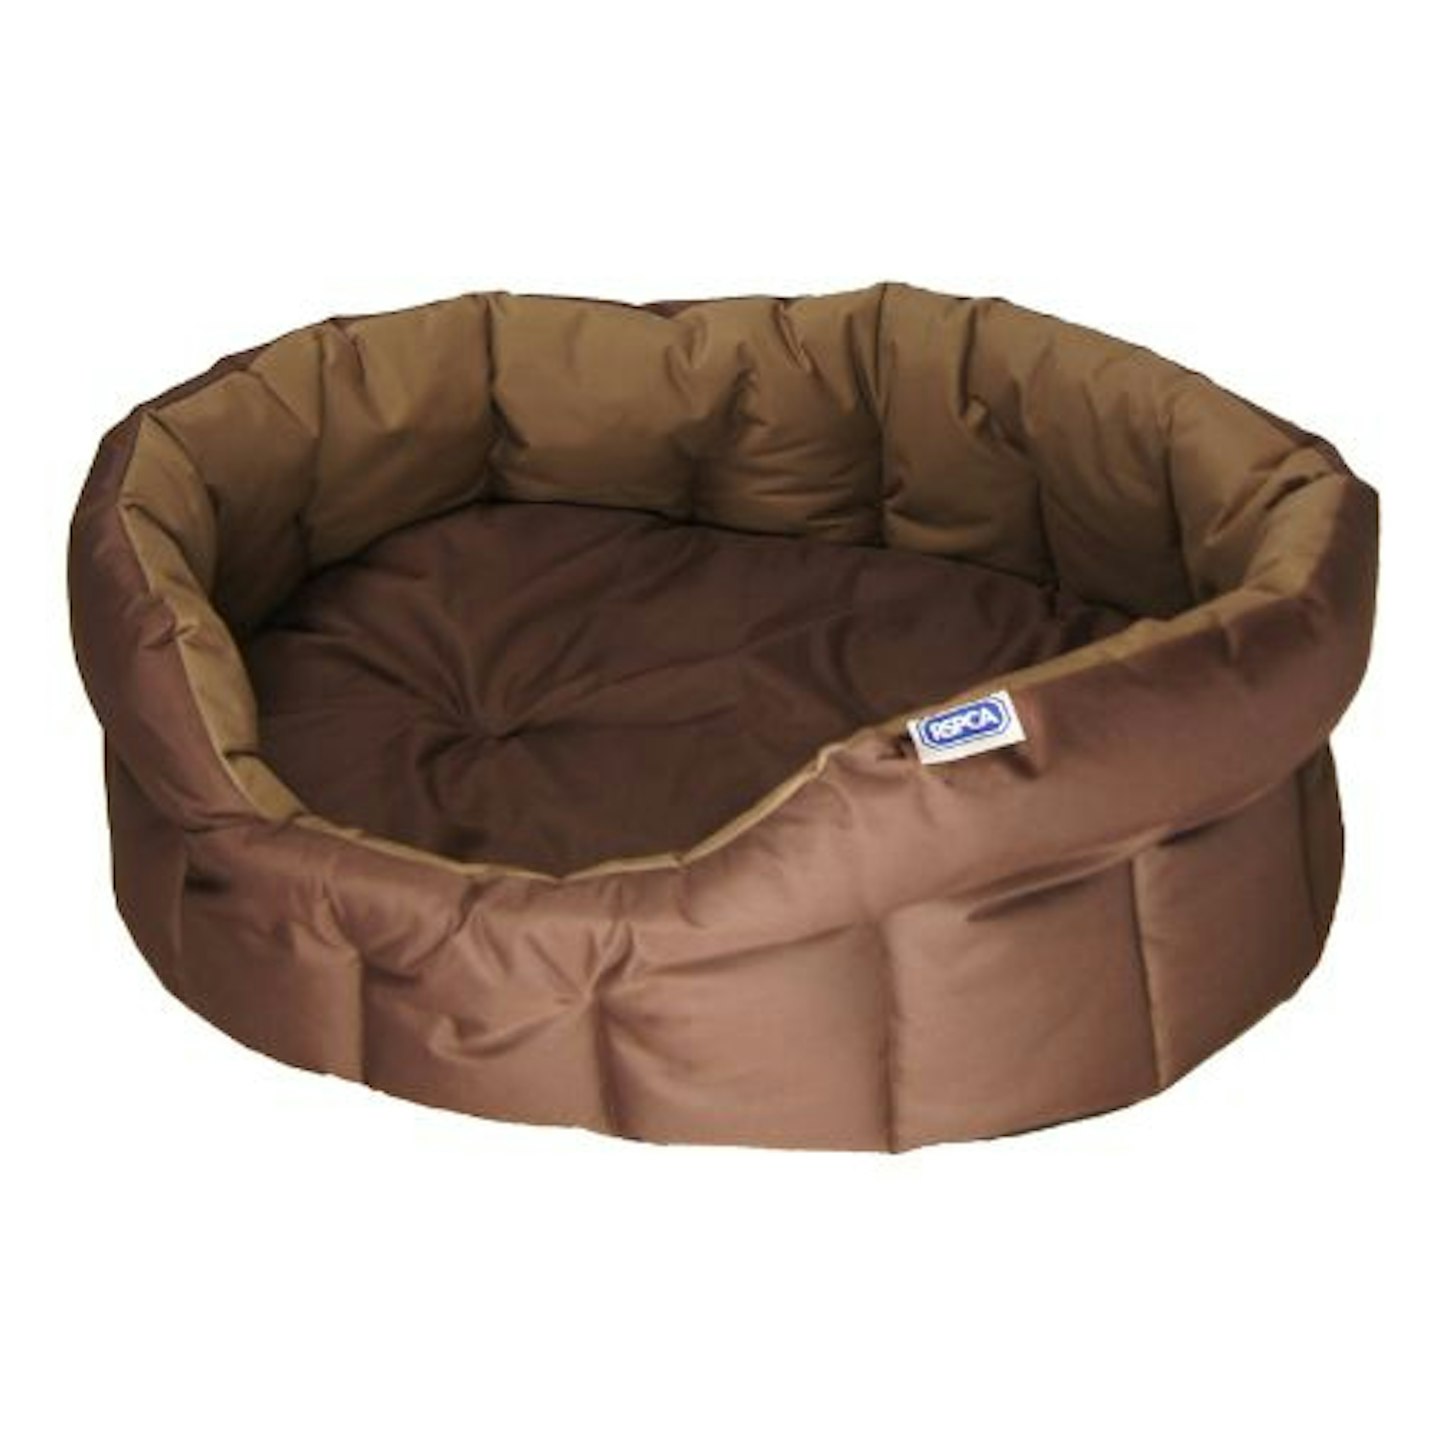 RSPCA Extra Tough Dog Bed - Brown